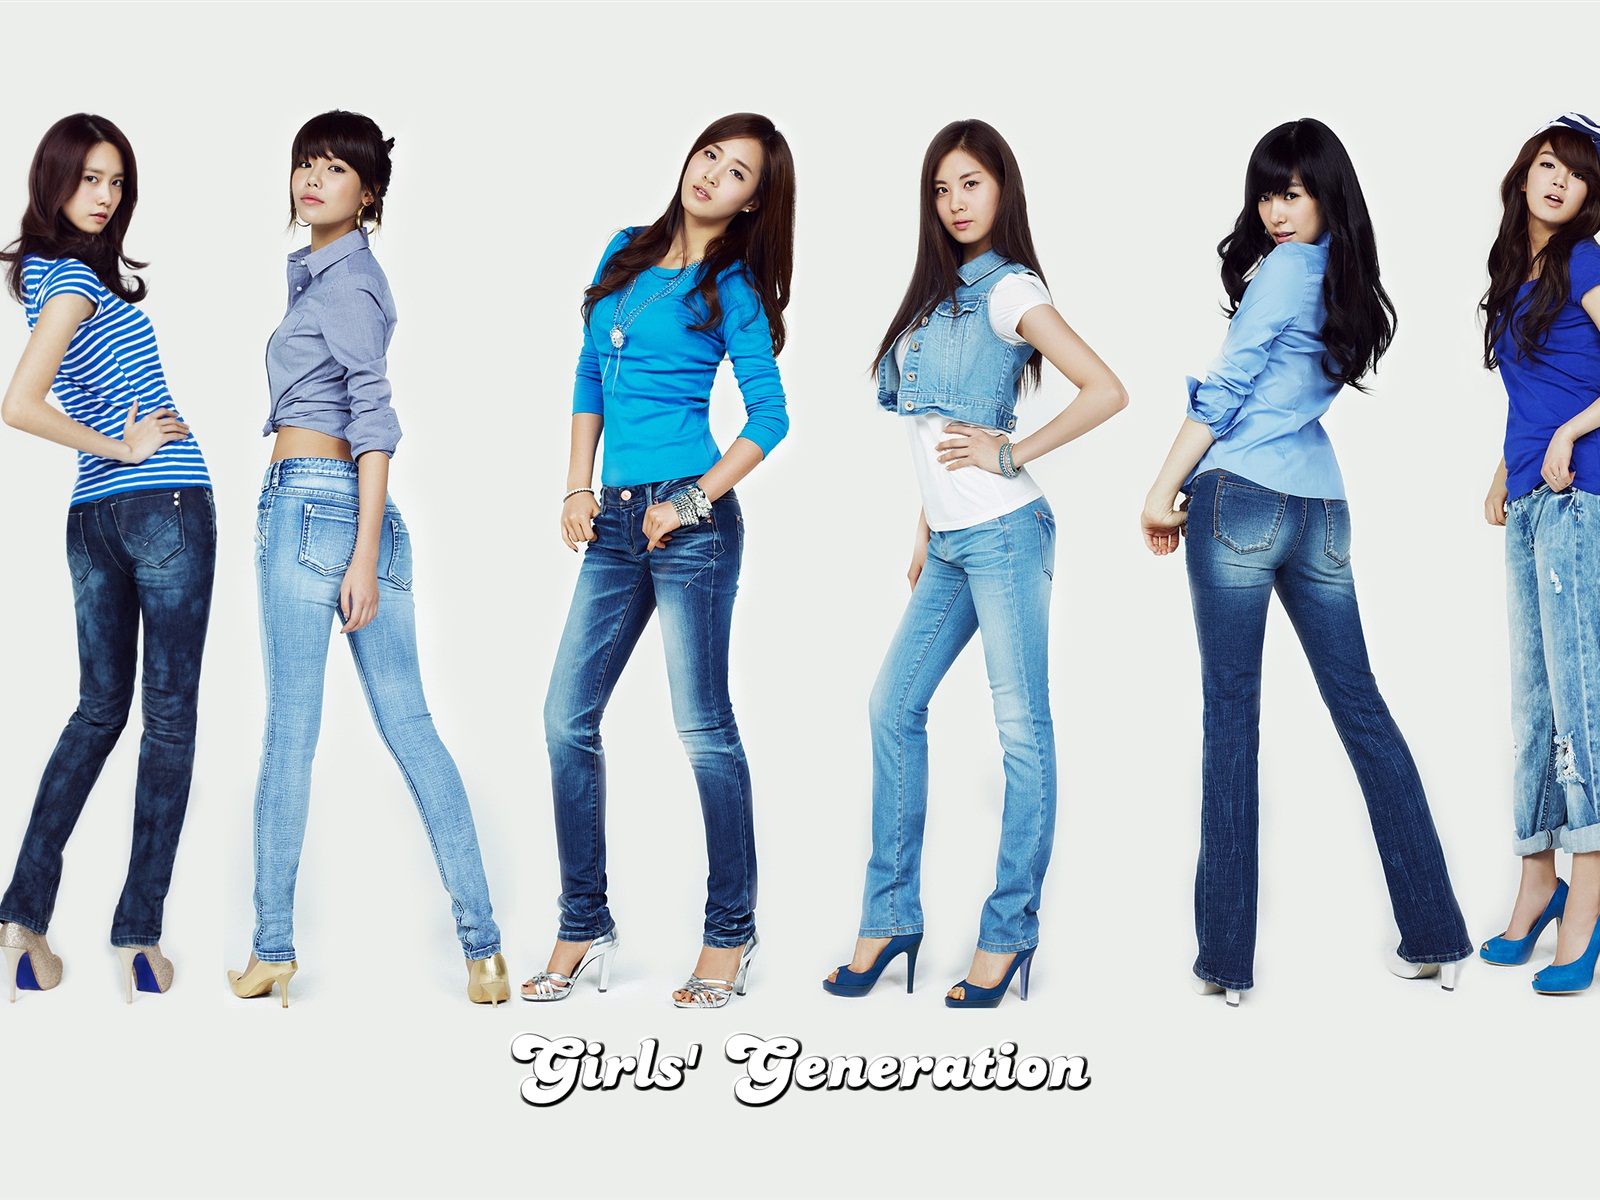 Girls Generation latest HD wallpapers collection #22 - 1600x1200